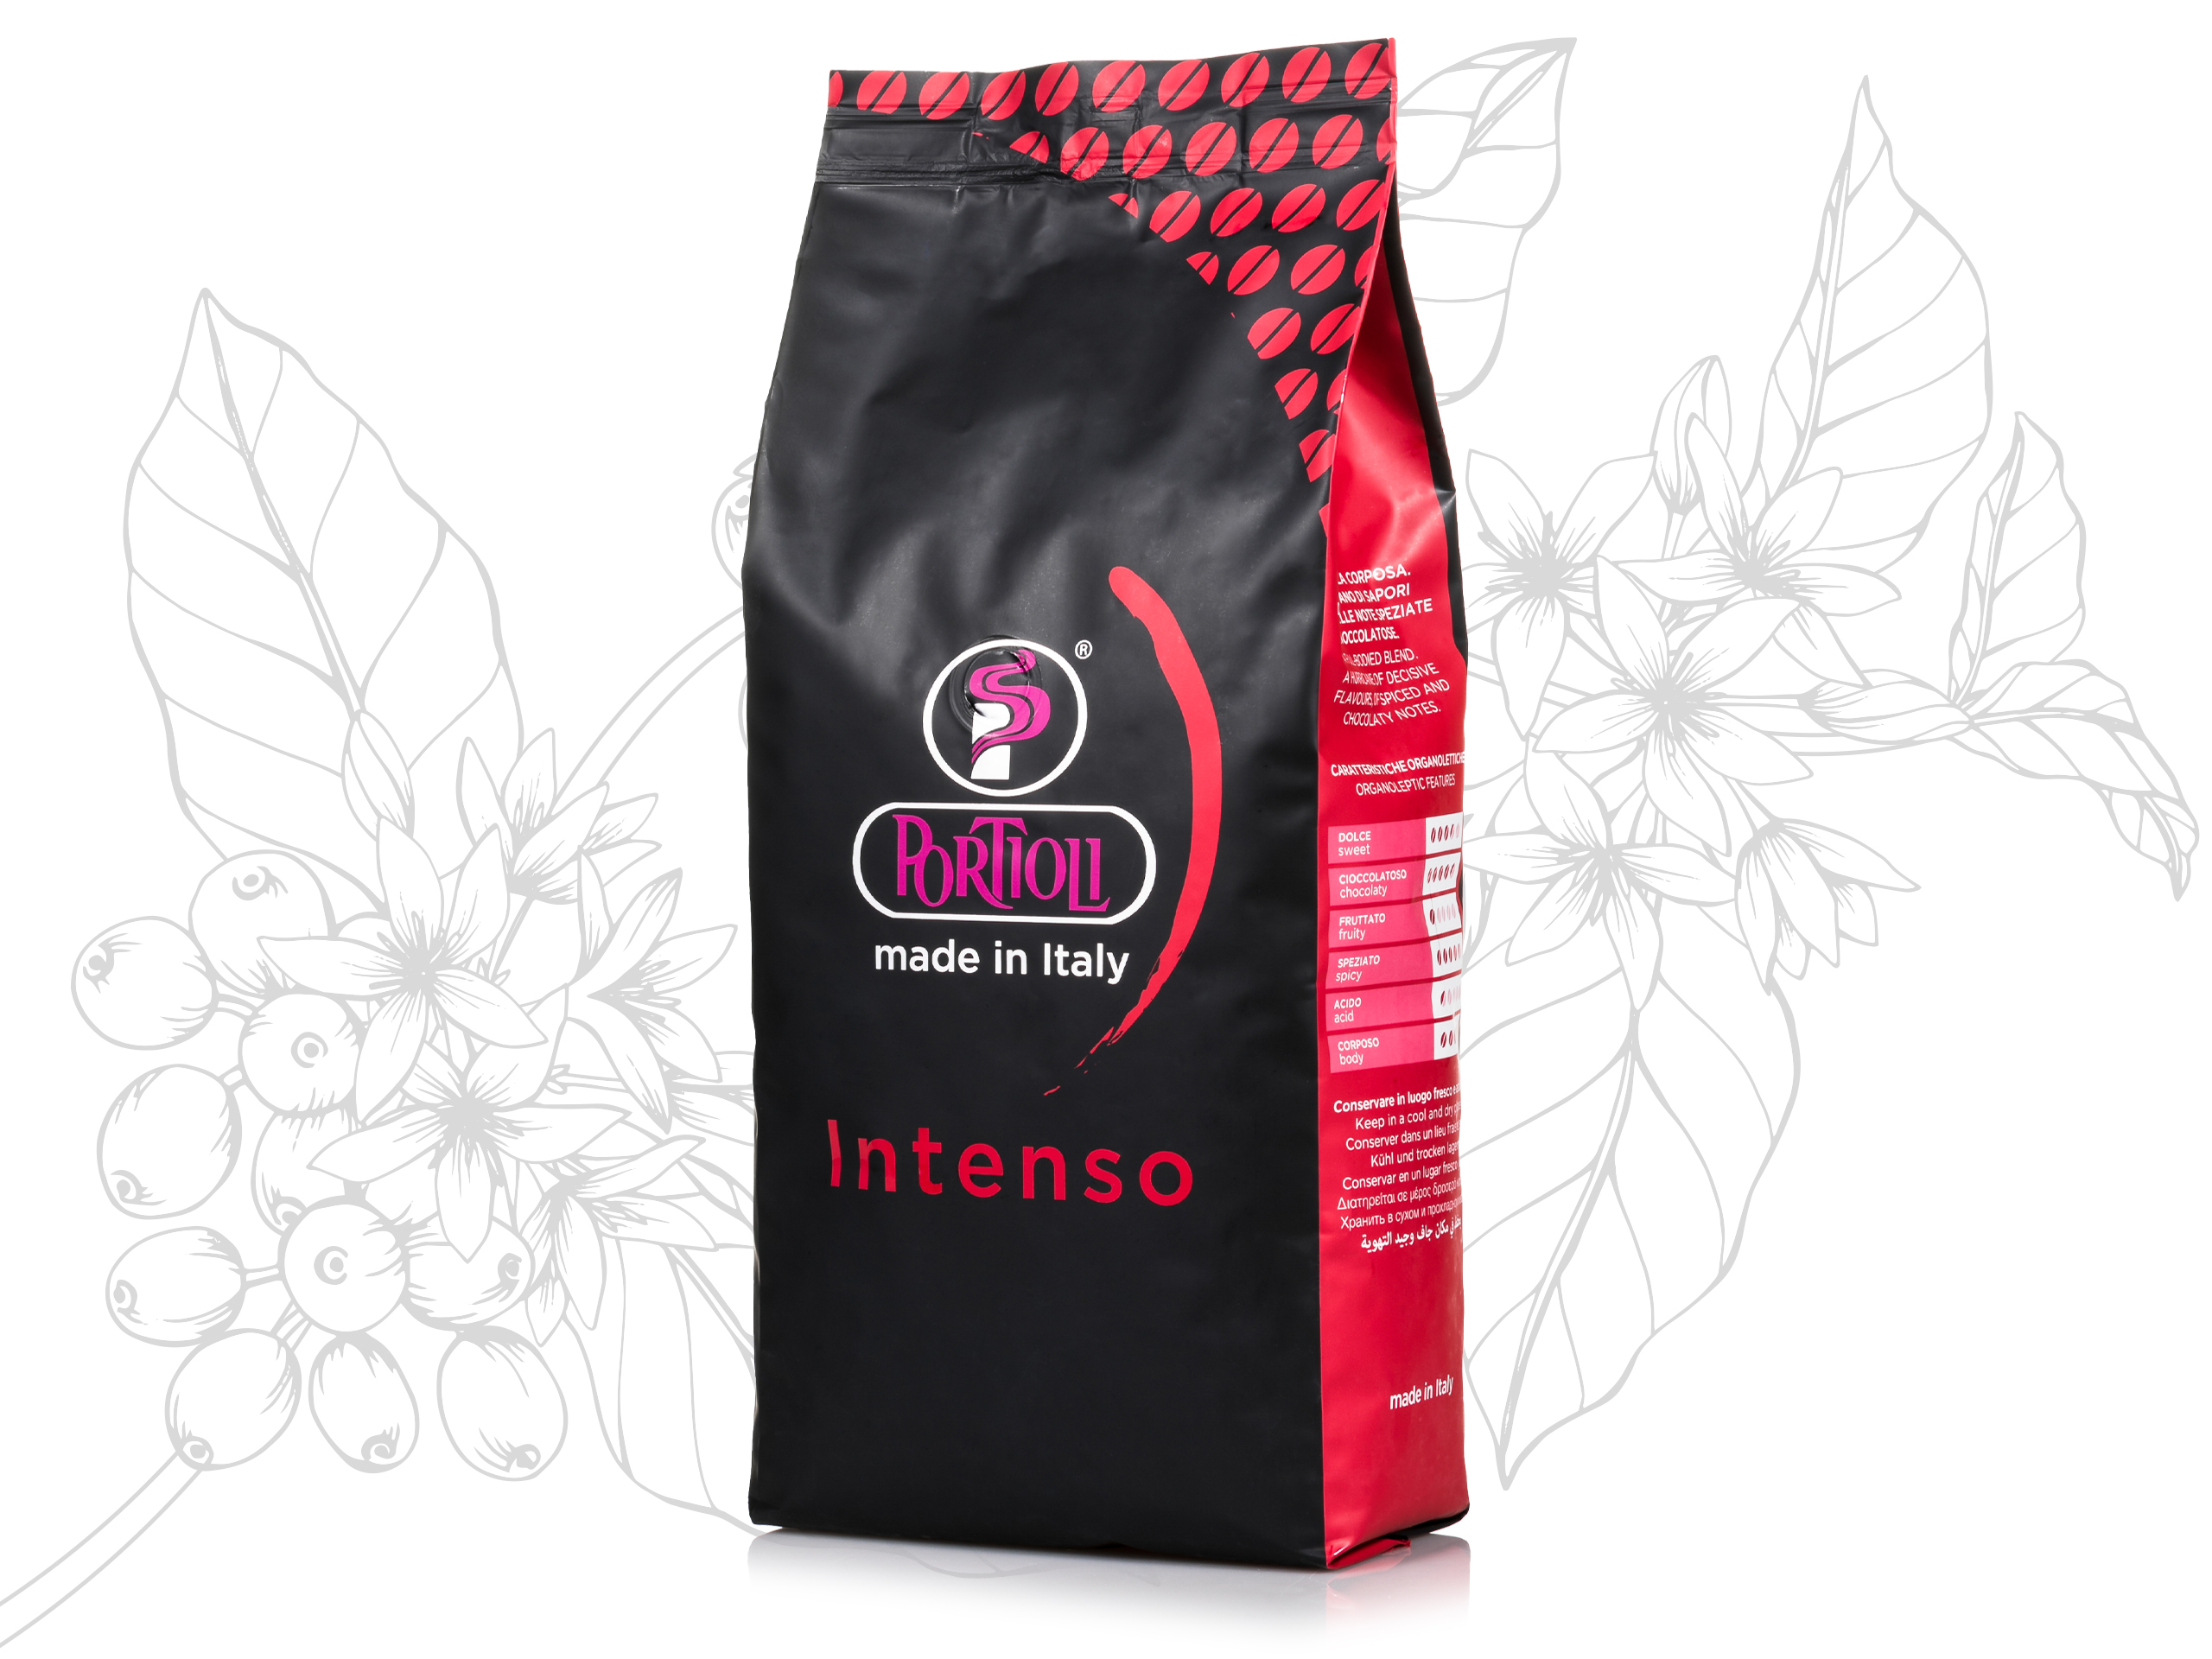 Intenso coffee blend for bars in 1000g Portioli bags.